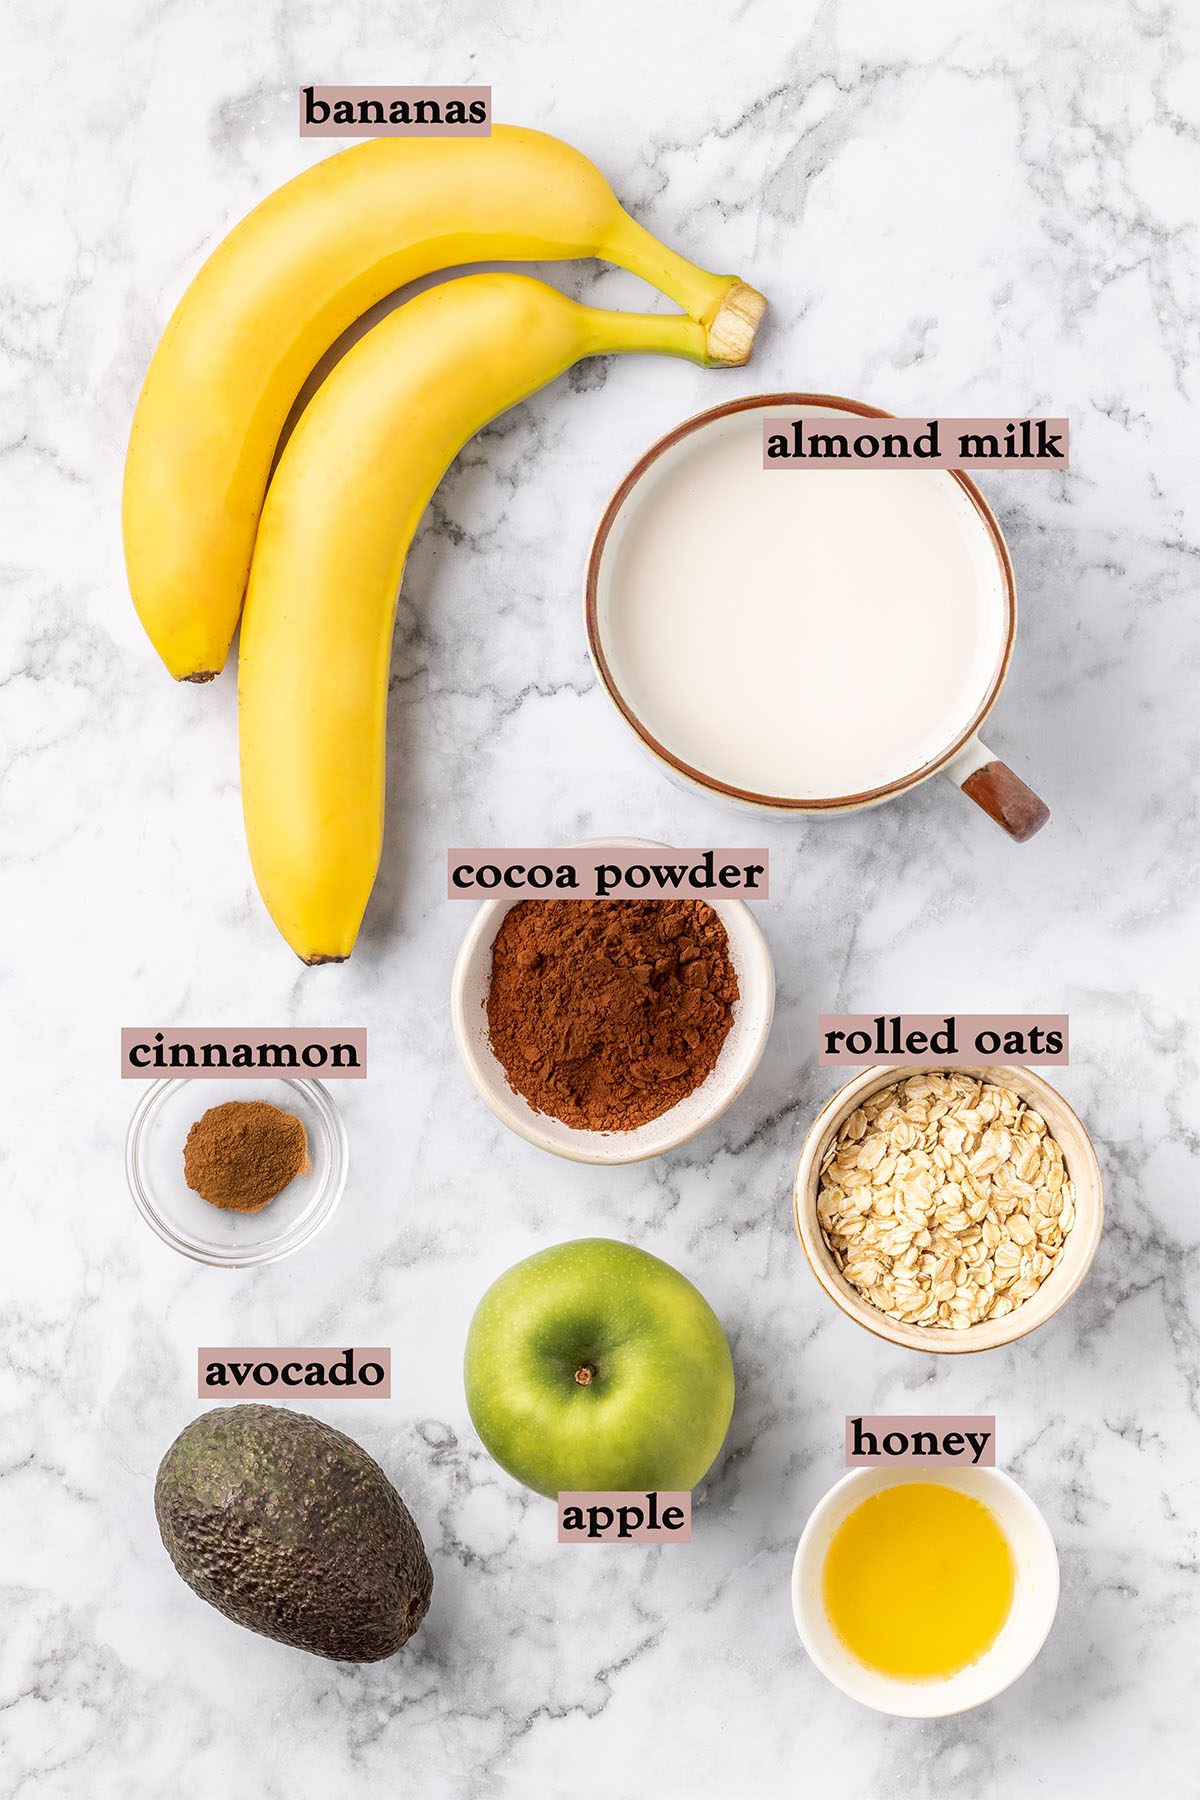 Ingredients for chocolate apple smoothie